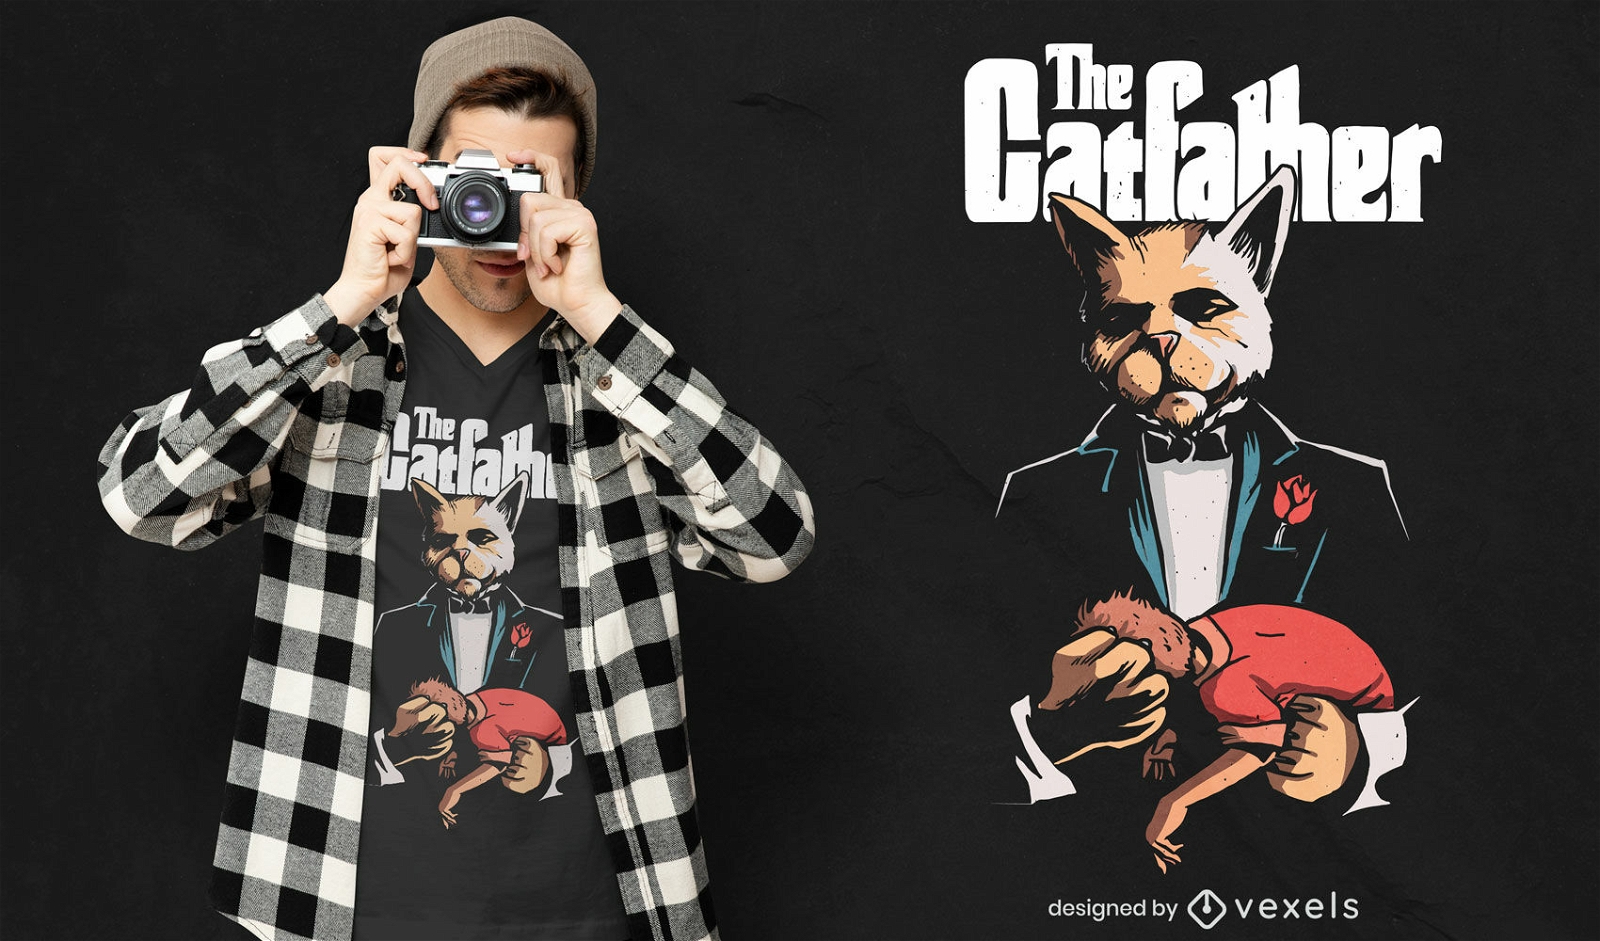 The catfather t-shirt design